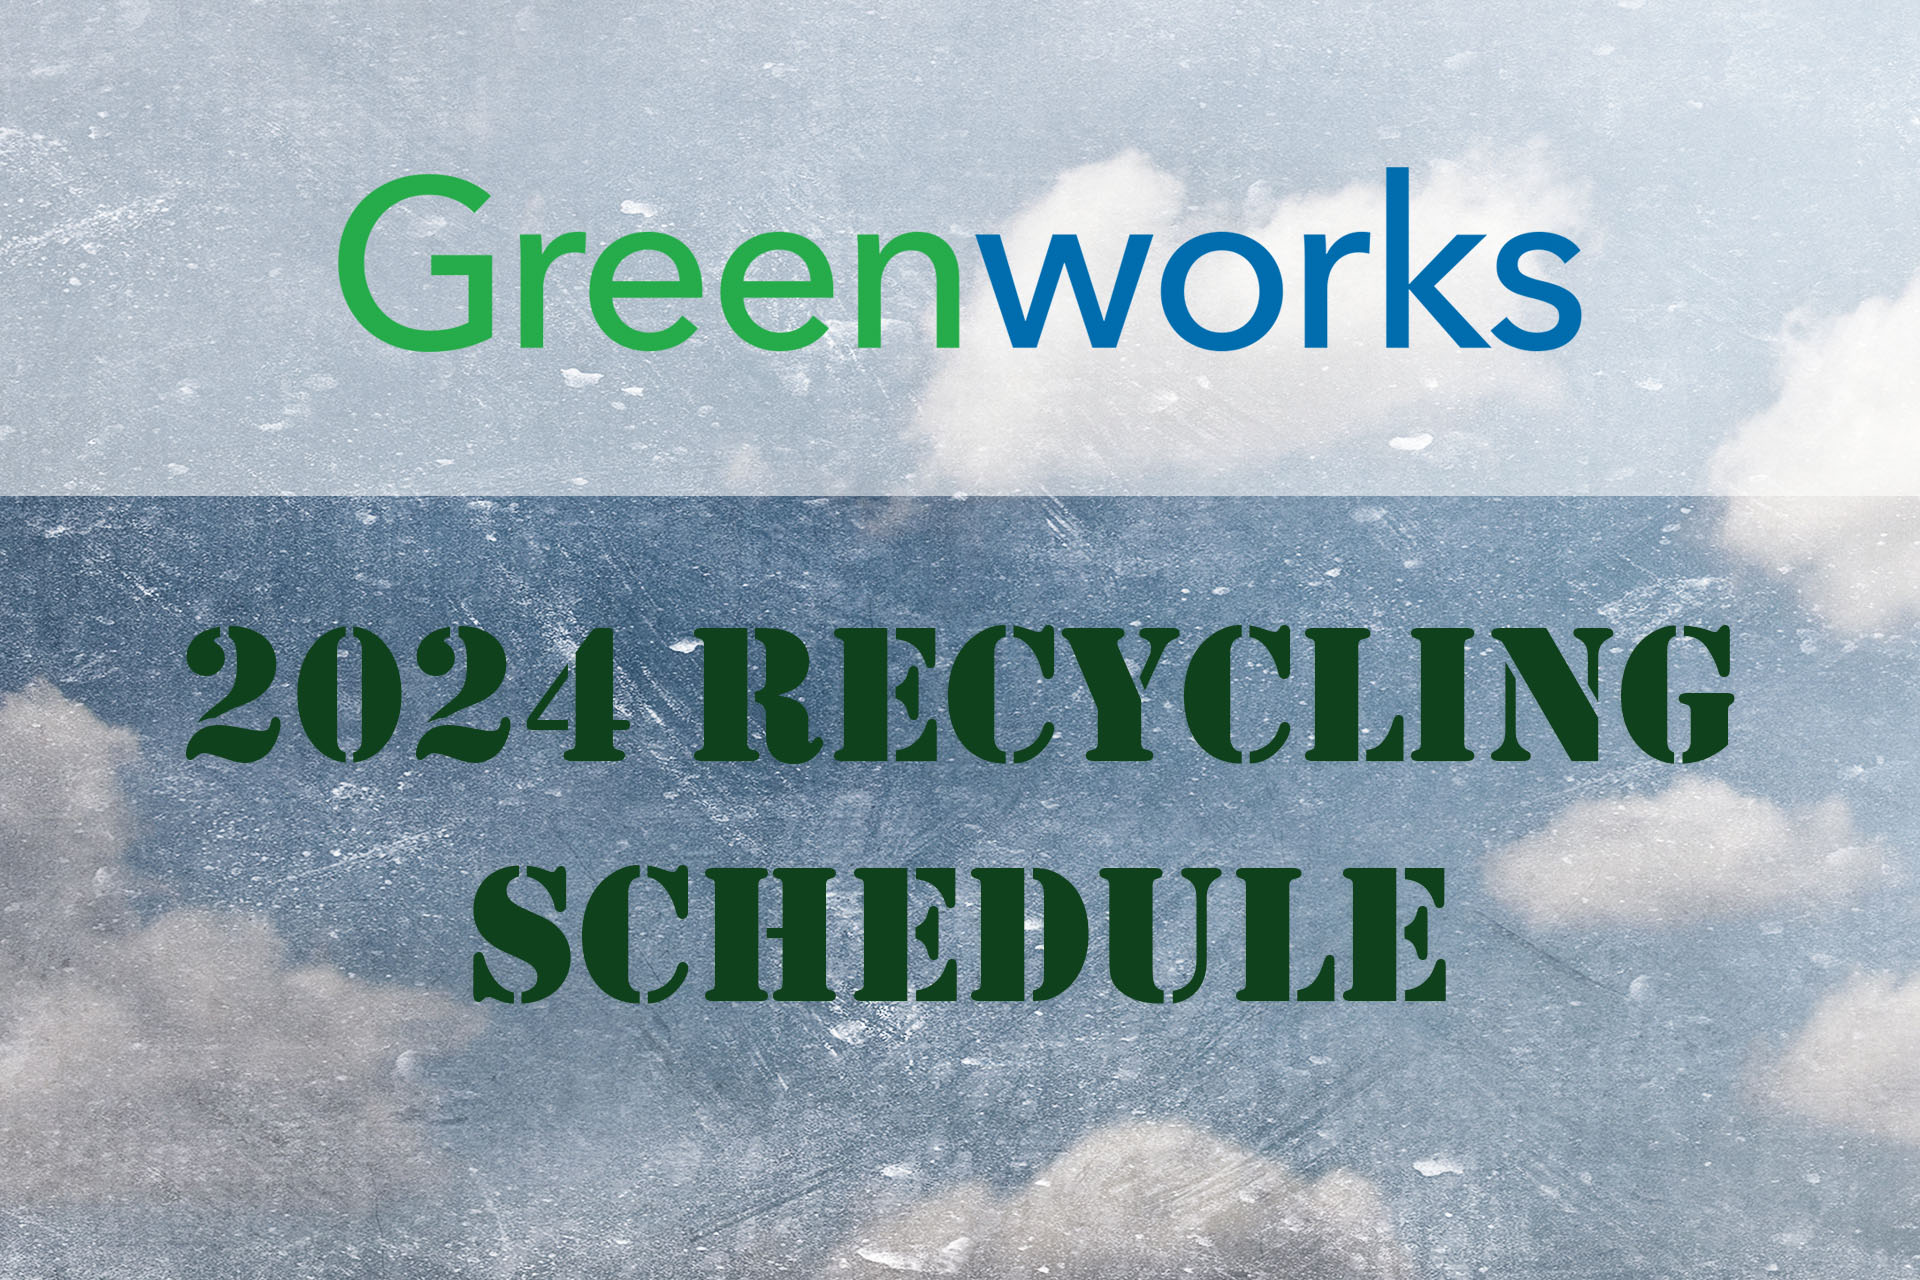 AnnouncementGW2024RecyclingSchedule Greenworks Recycling